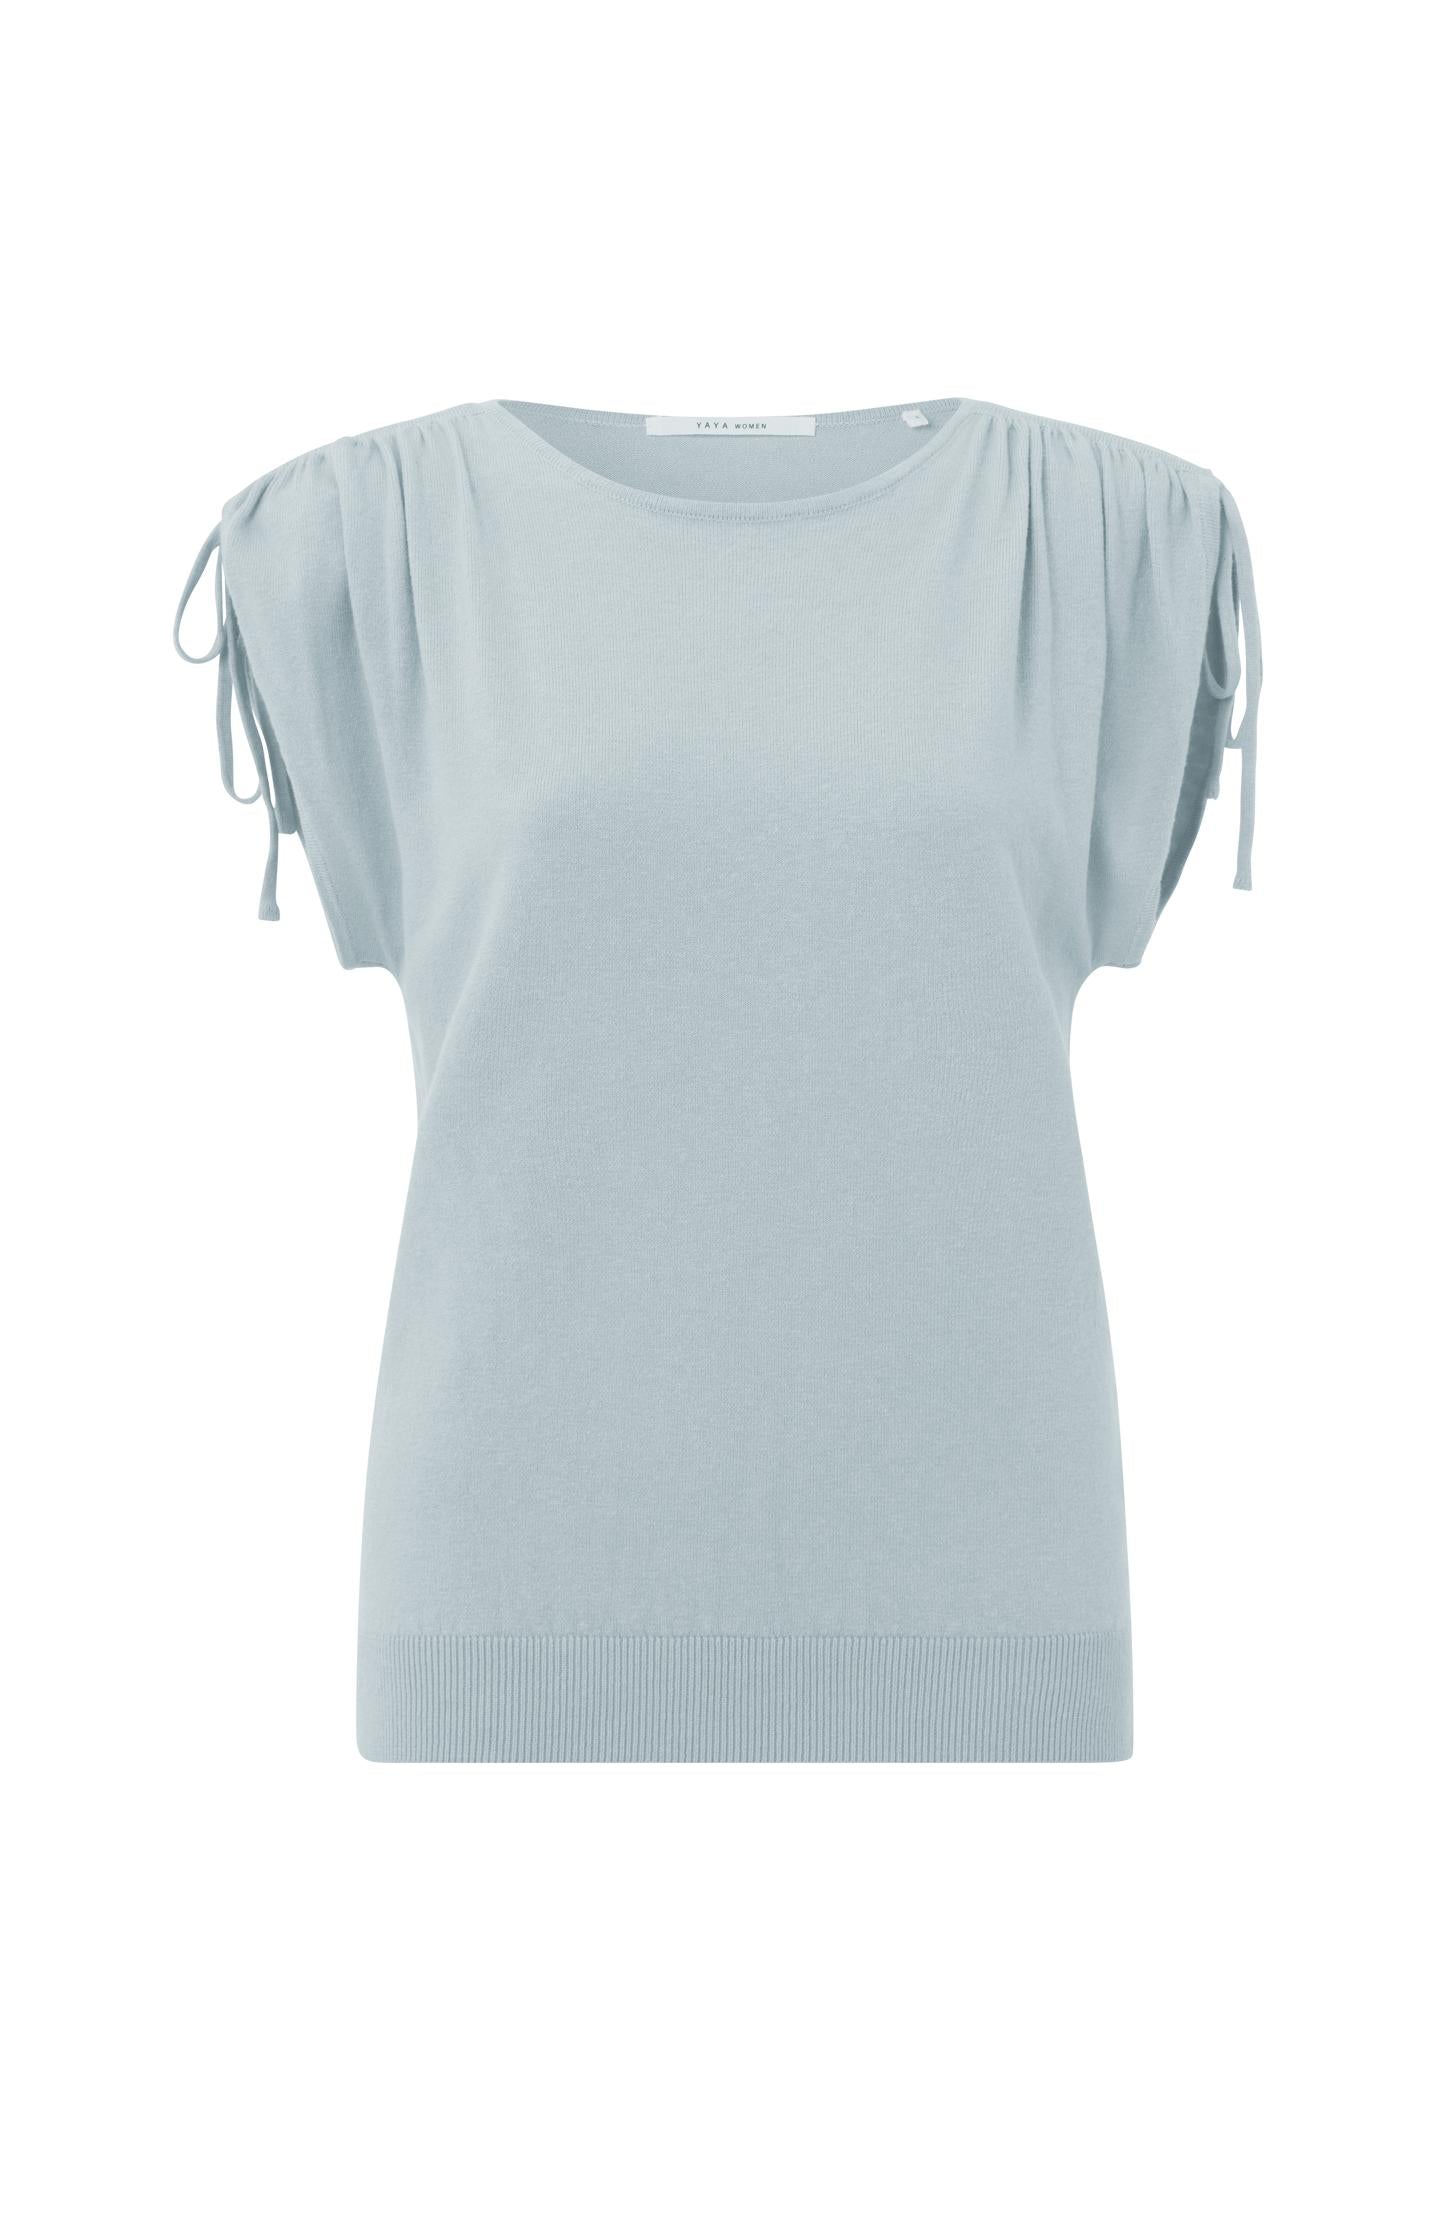 Sweater with round neck, short sleeves and shoulder details - Type: product